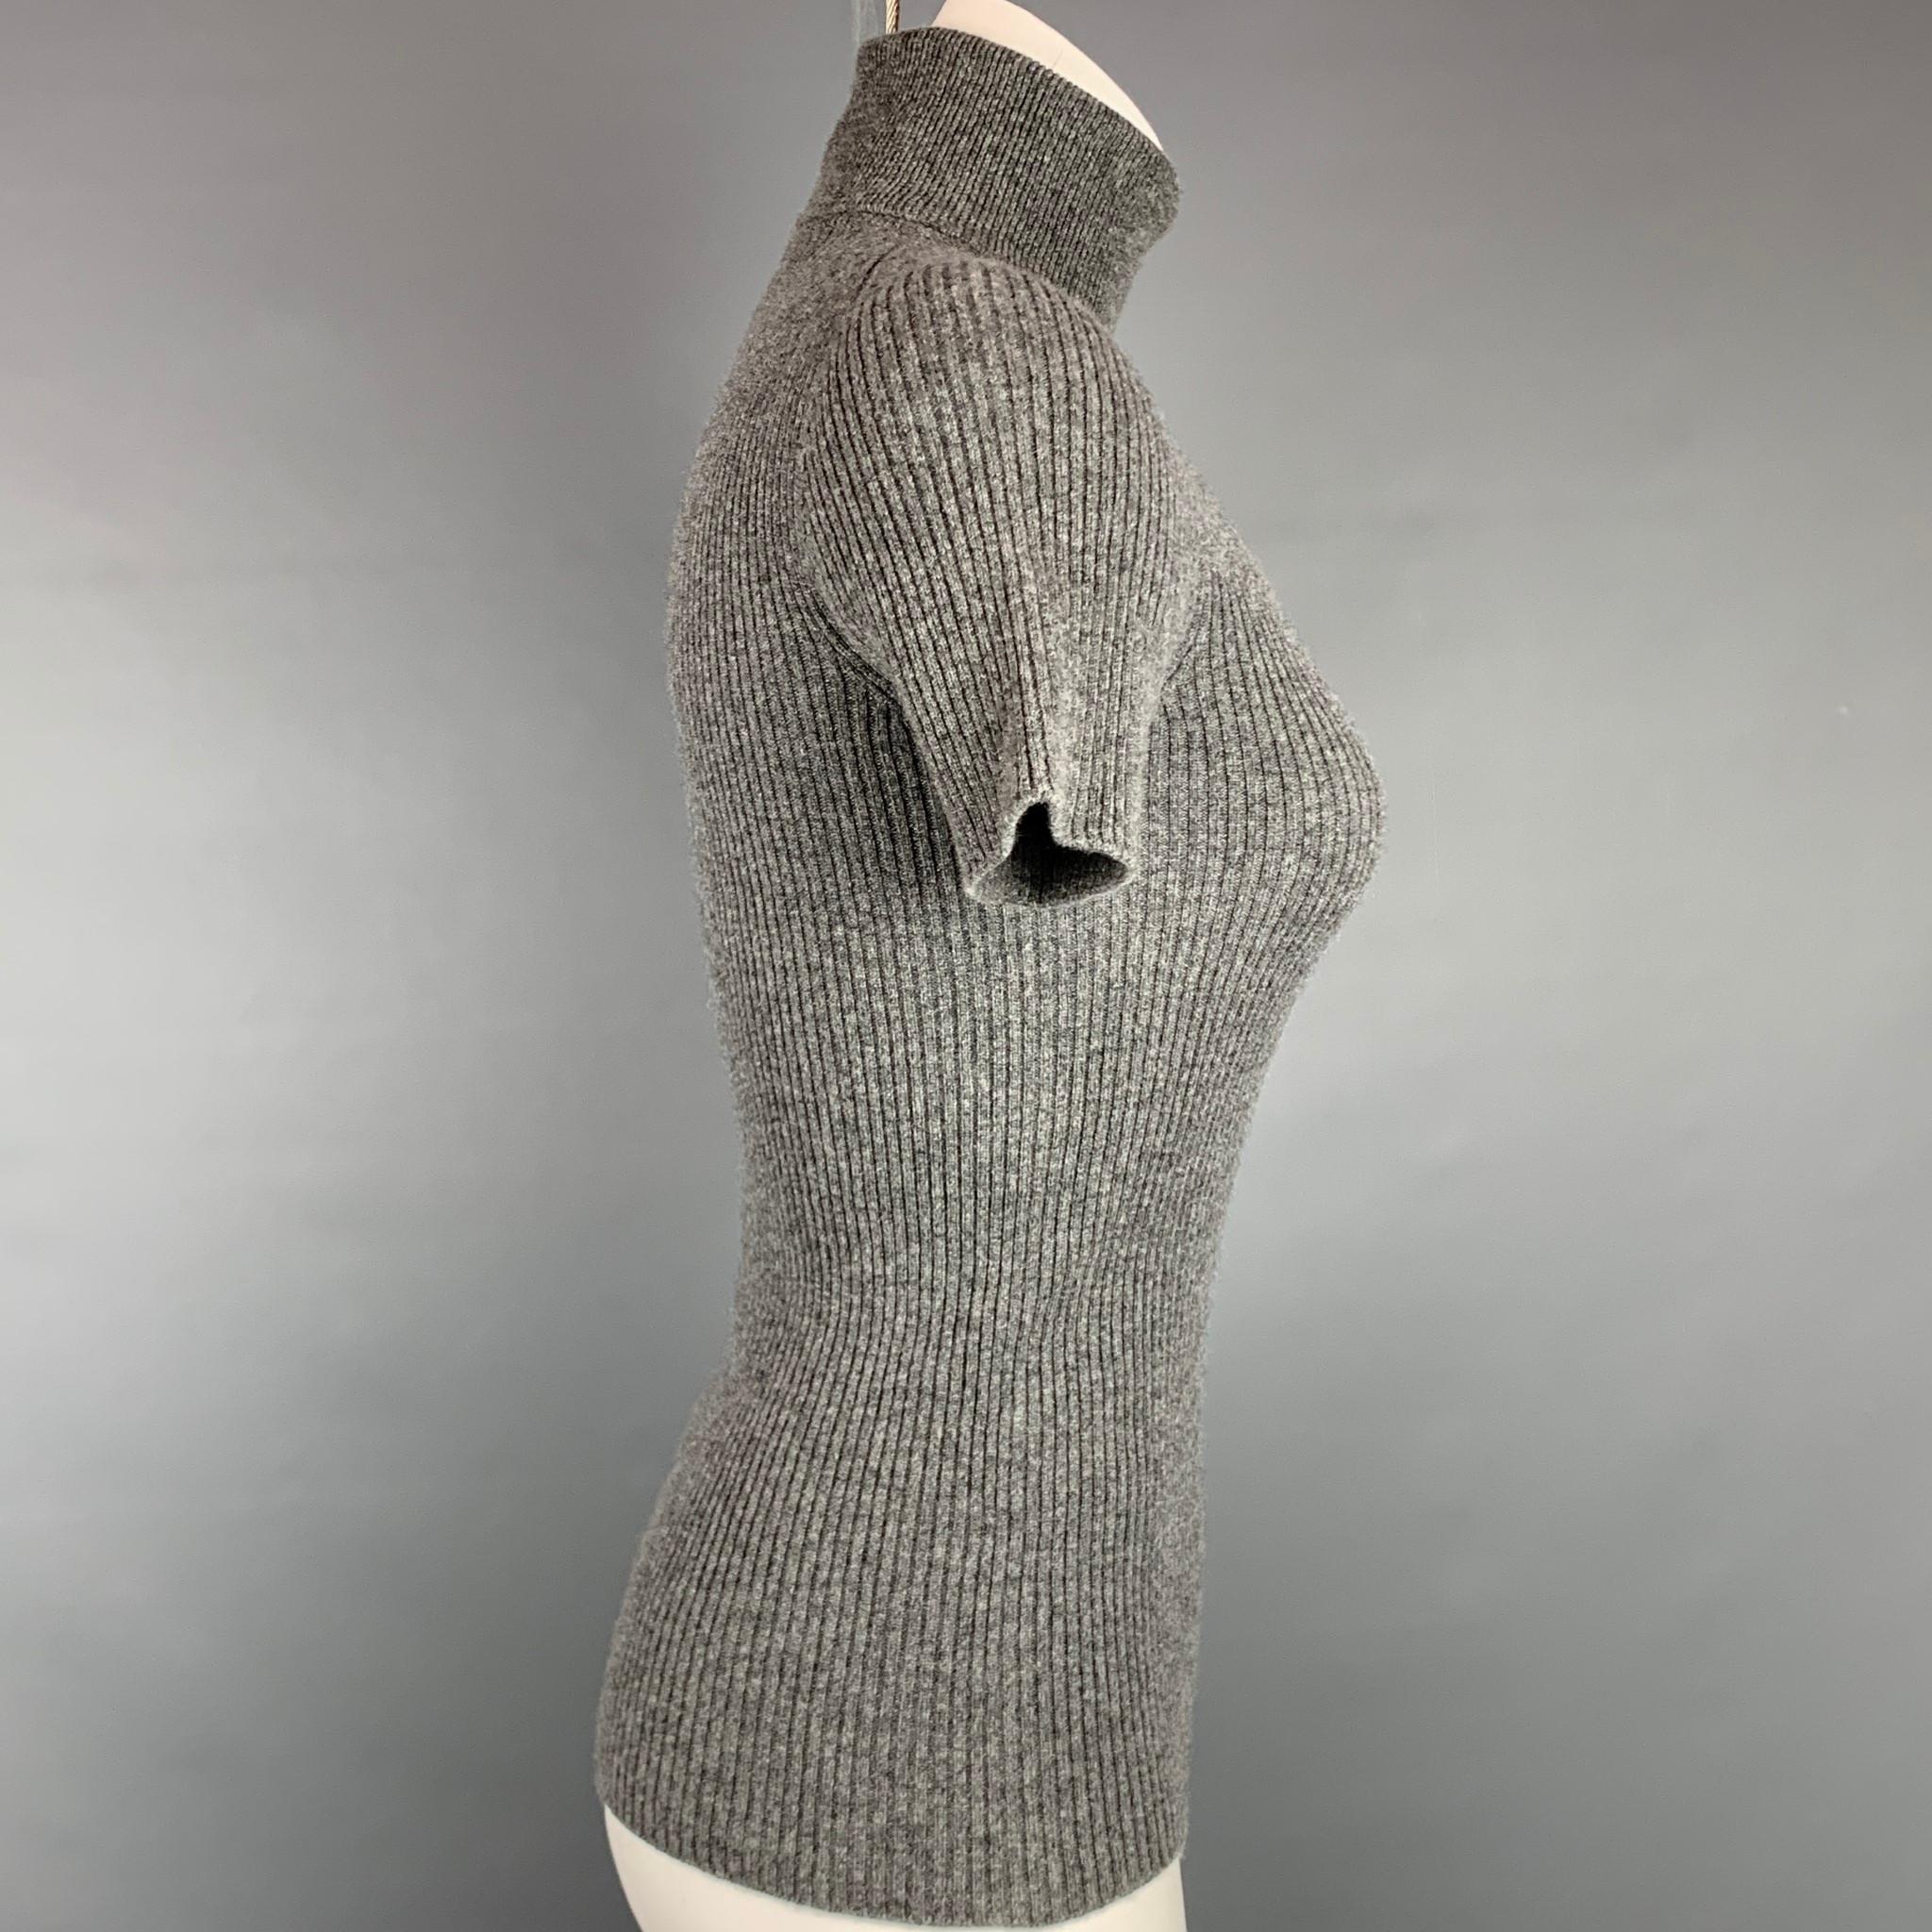 ROCHAS pullover comes in a grey ribbed cashmere featuring a 